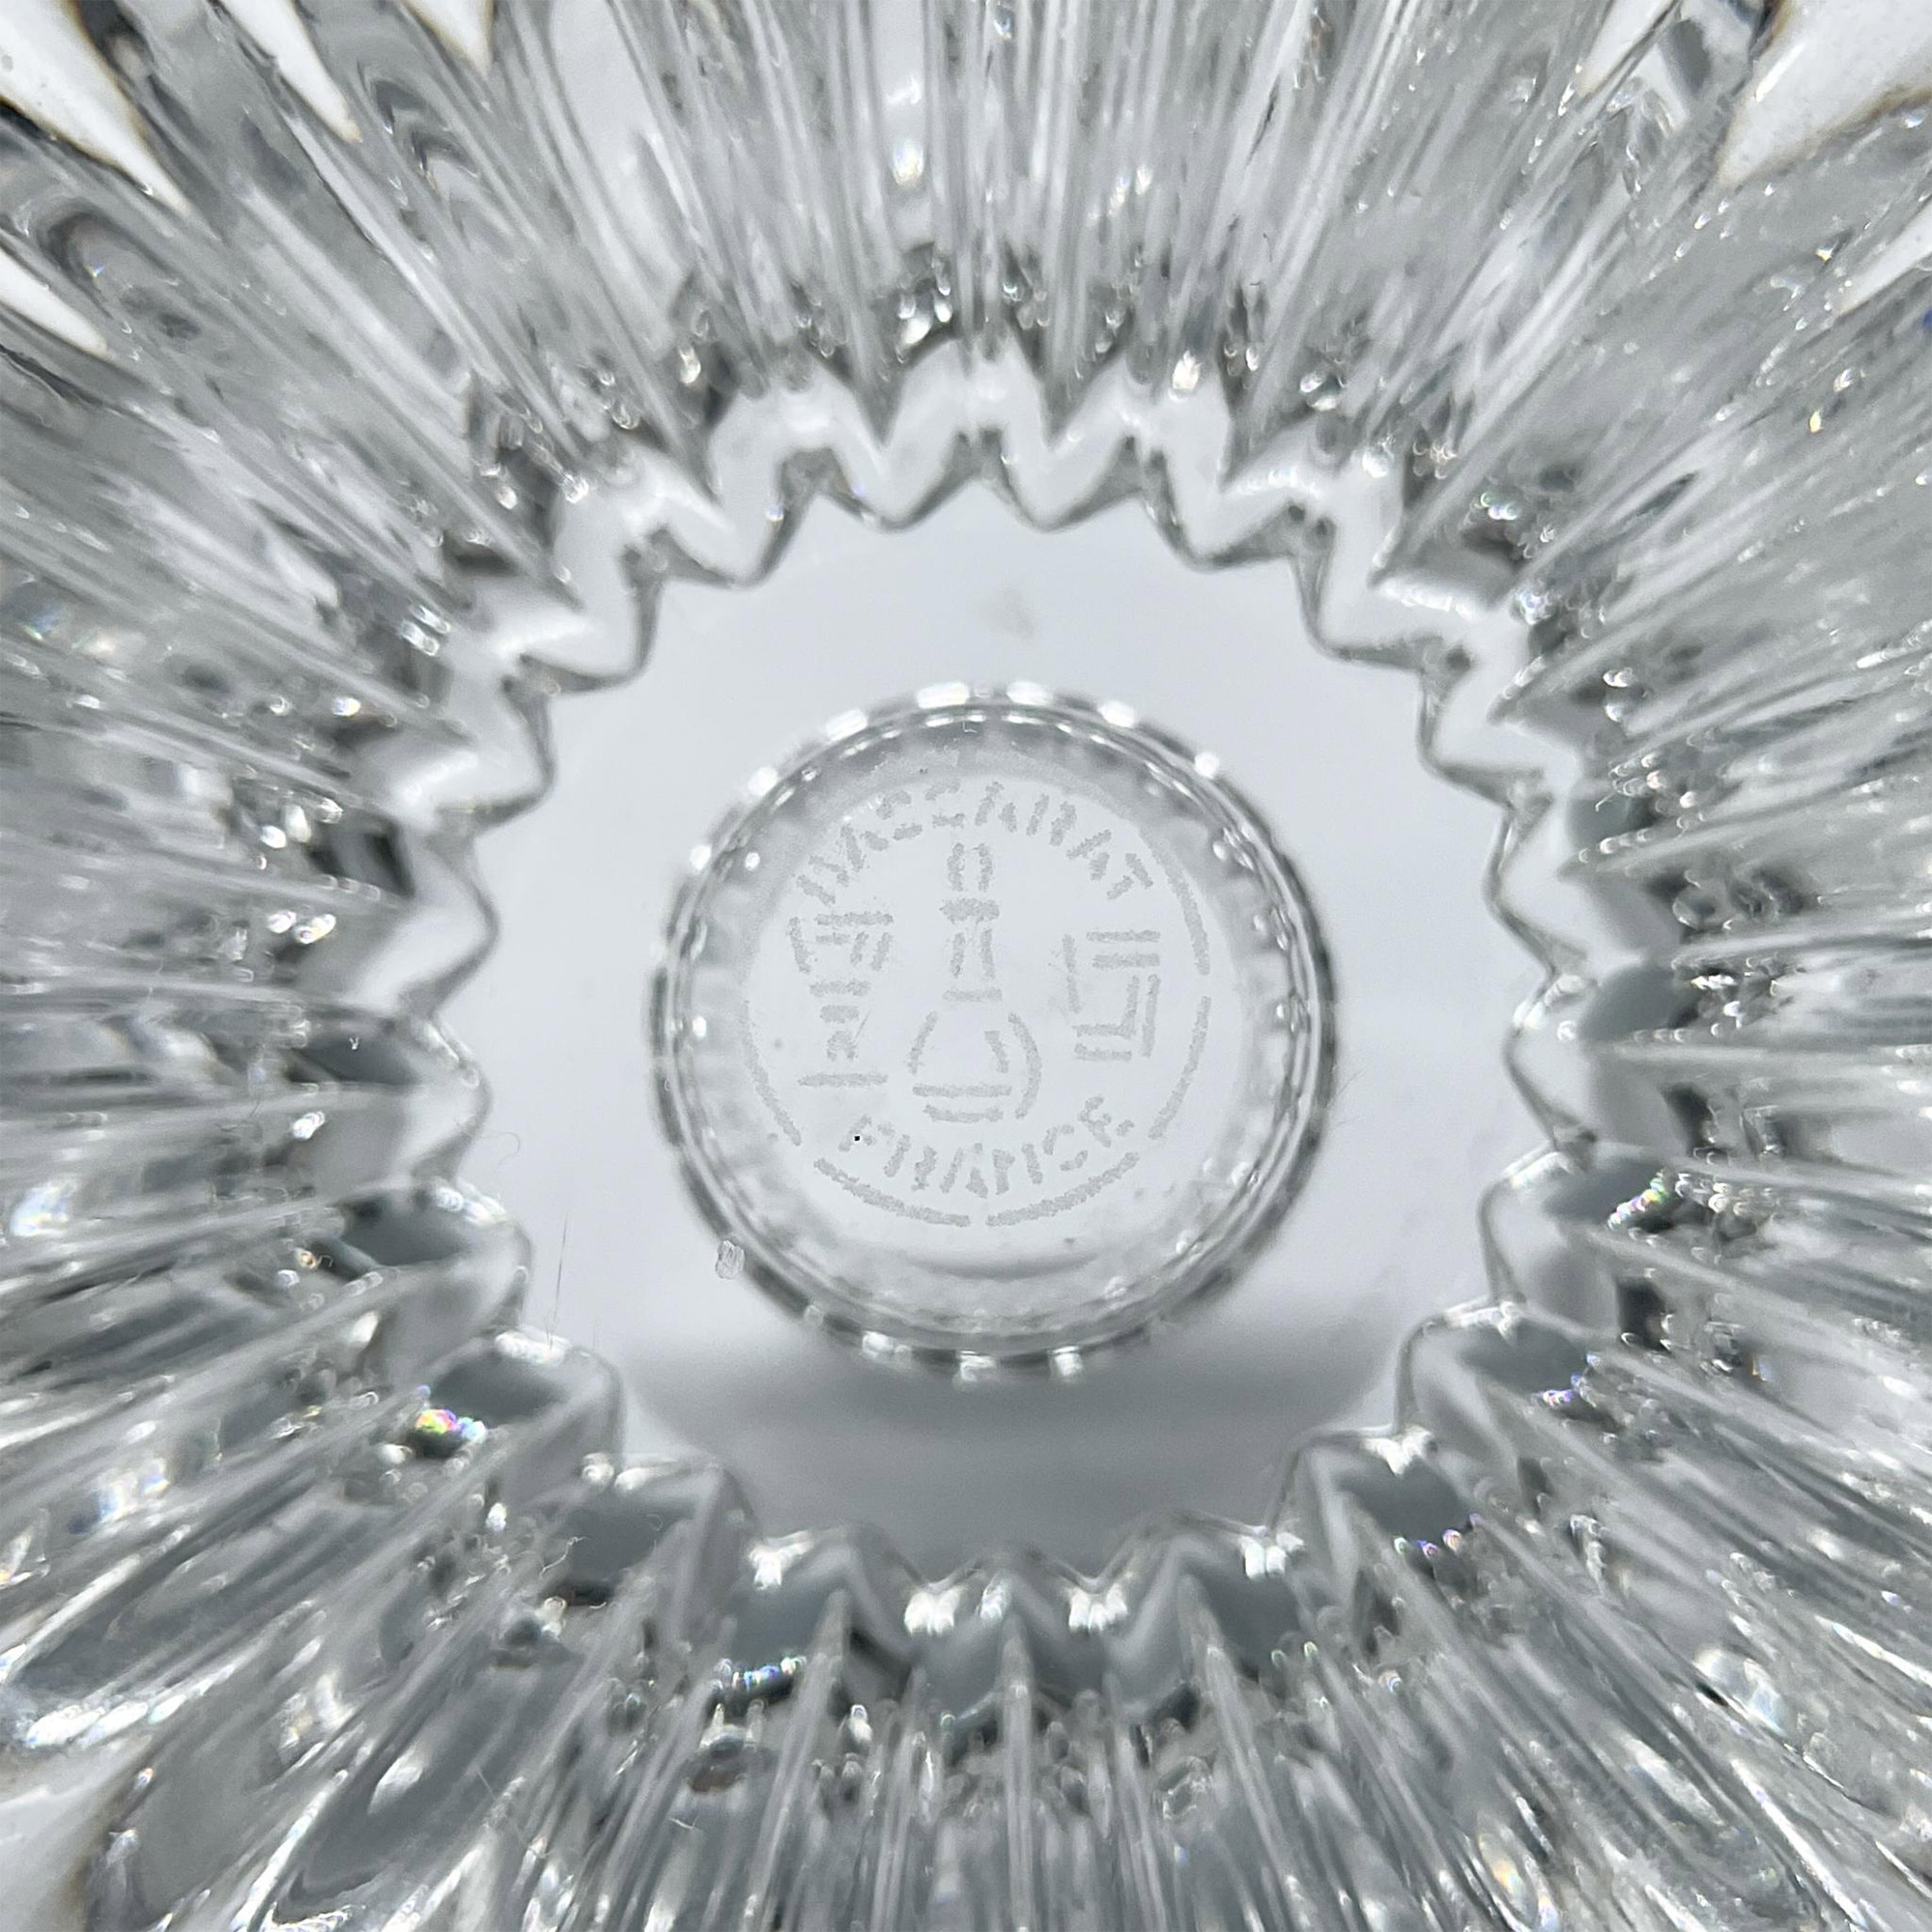 Pair of Baccarat Crystal Candle Holders, Massena - Image 3 of 3